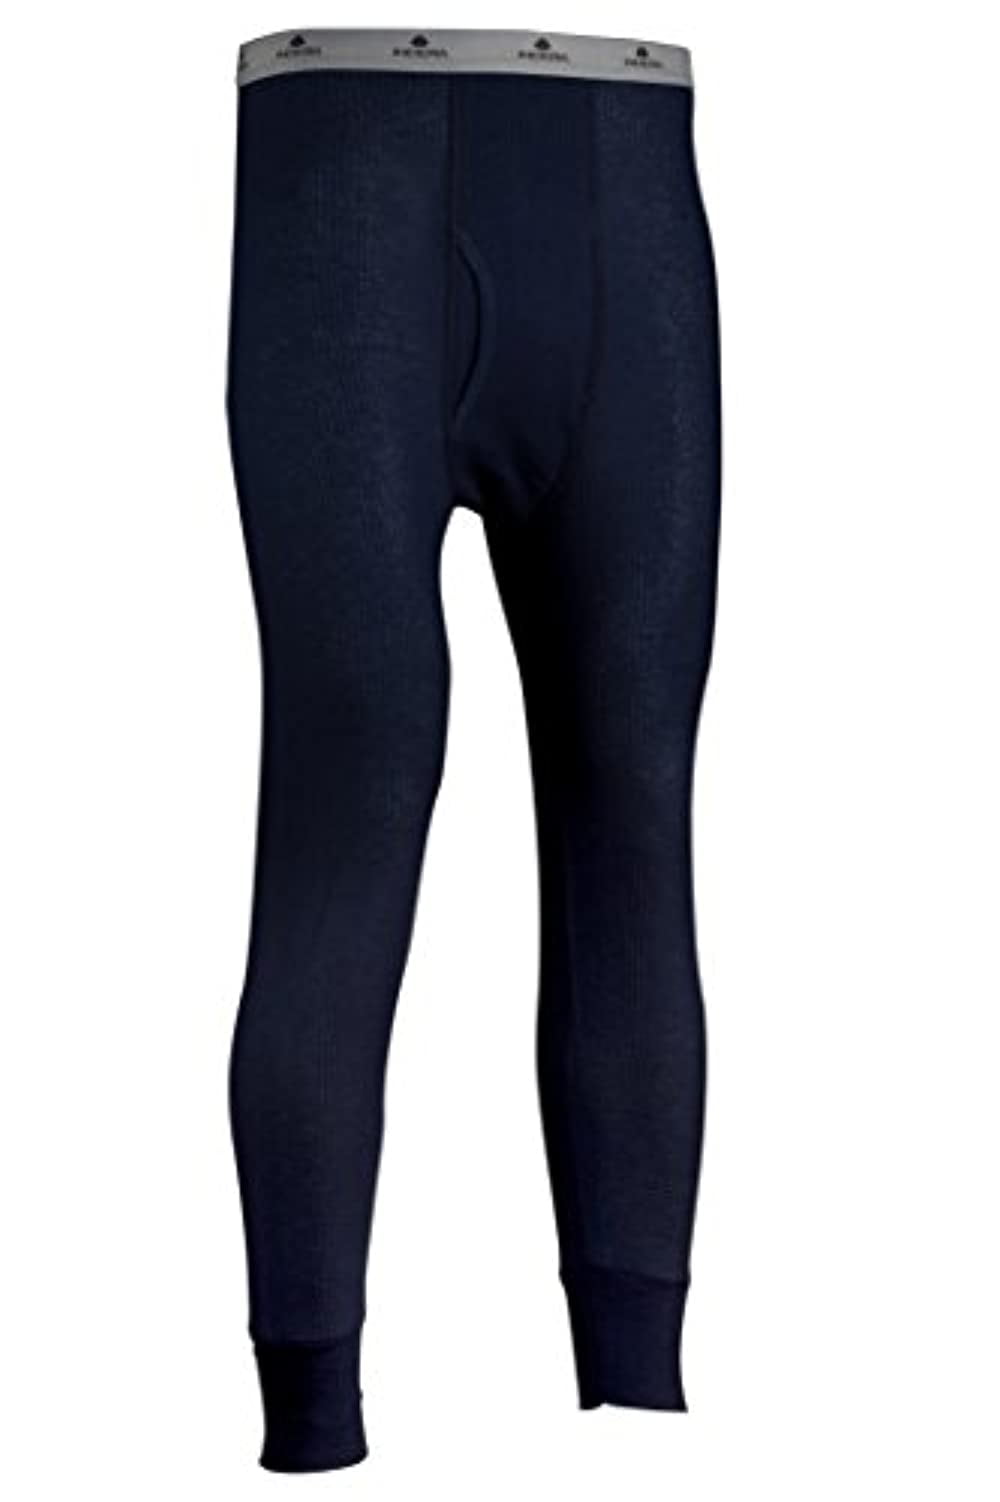  Indera Traditional Long Johns Thermal Underwear for Men in Tall  Sizes, Natural, Medium : Clothing, Shoes & Jewelry